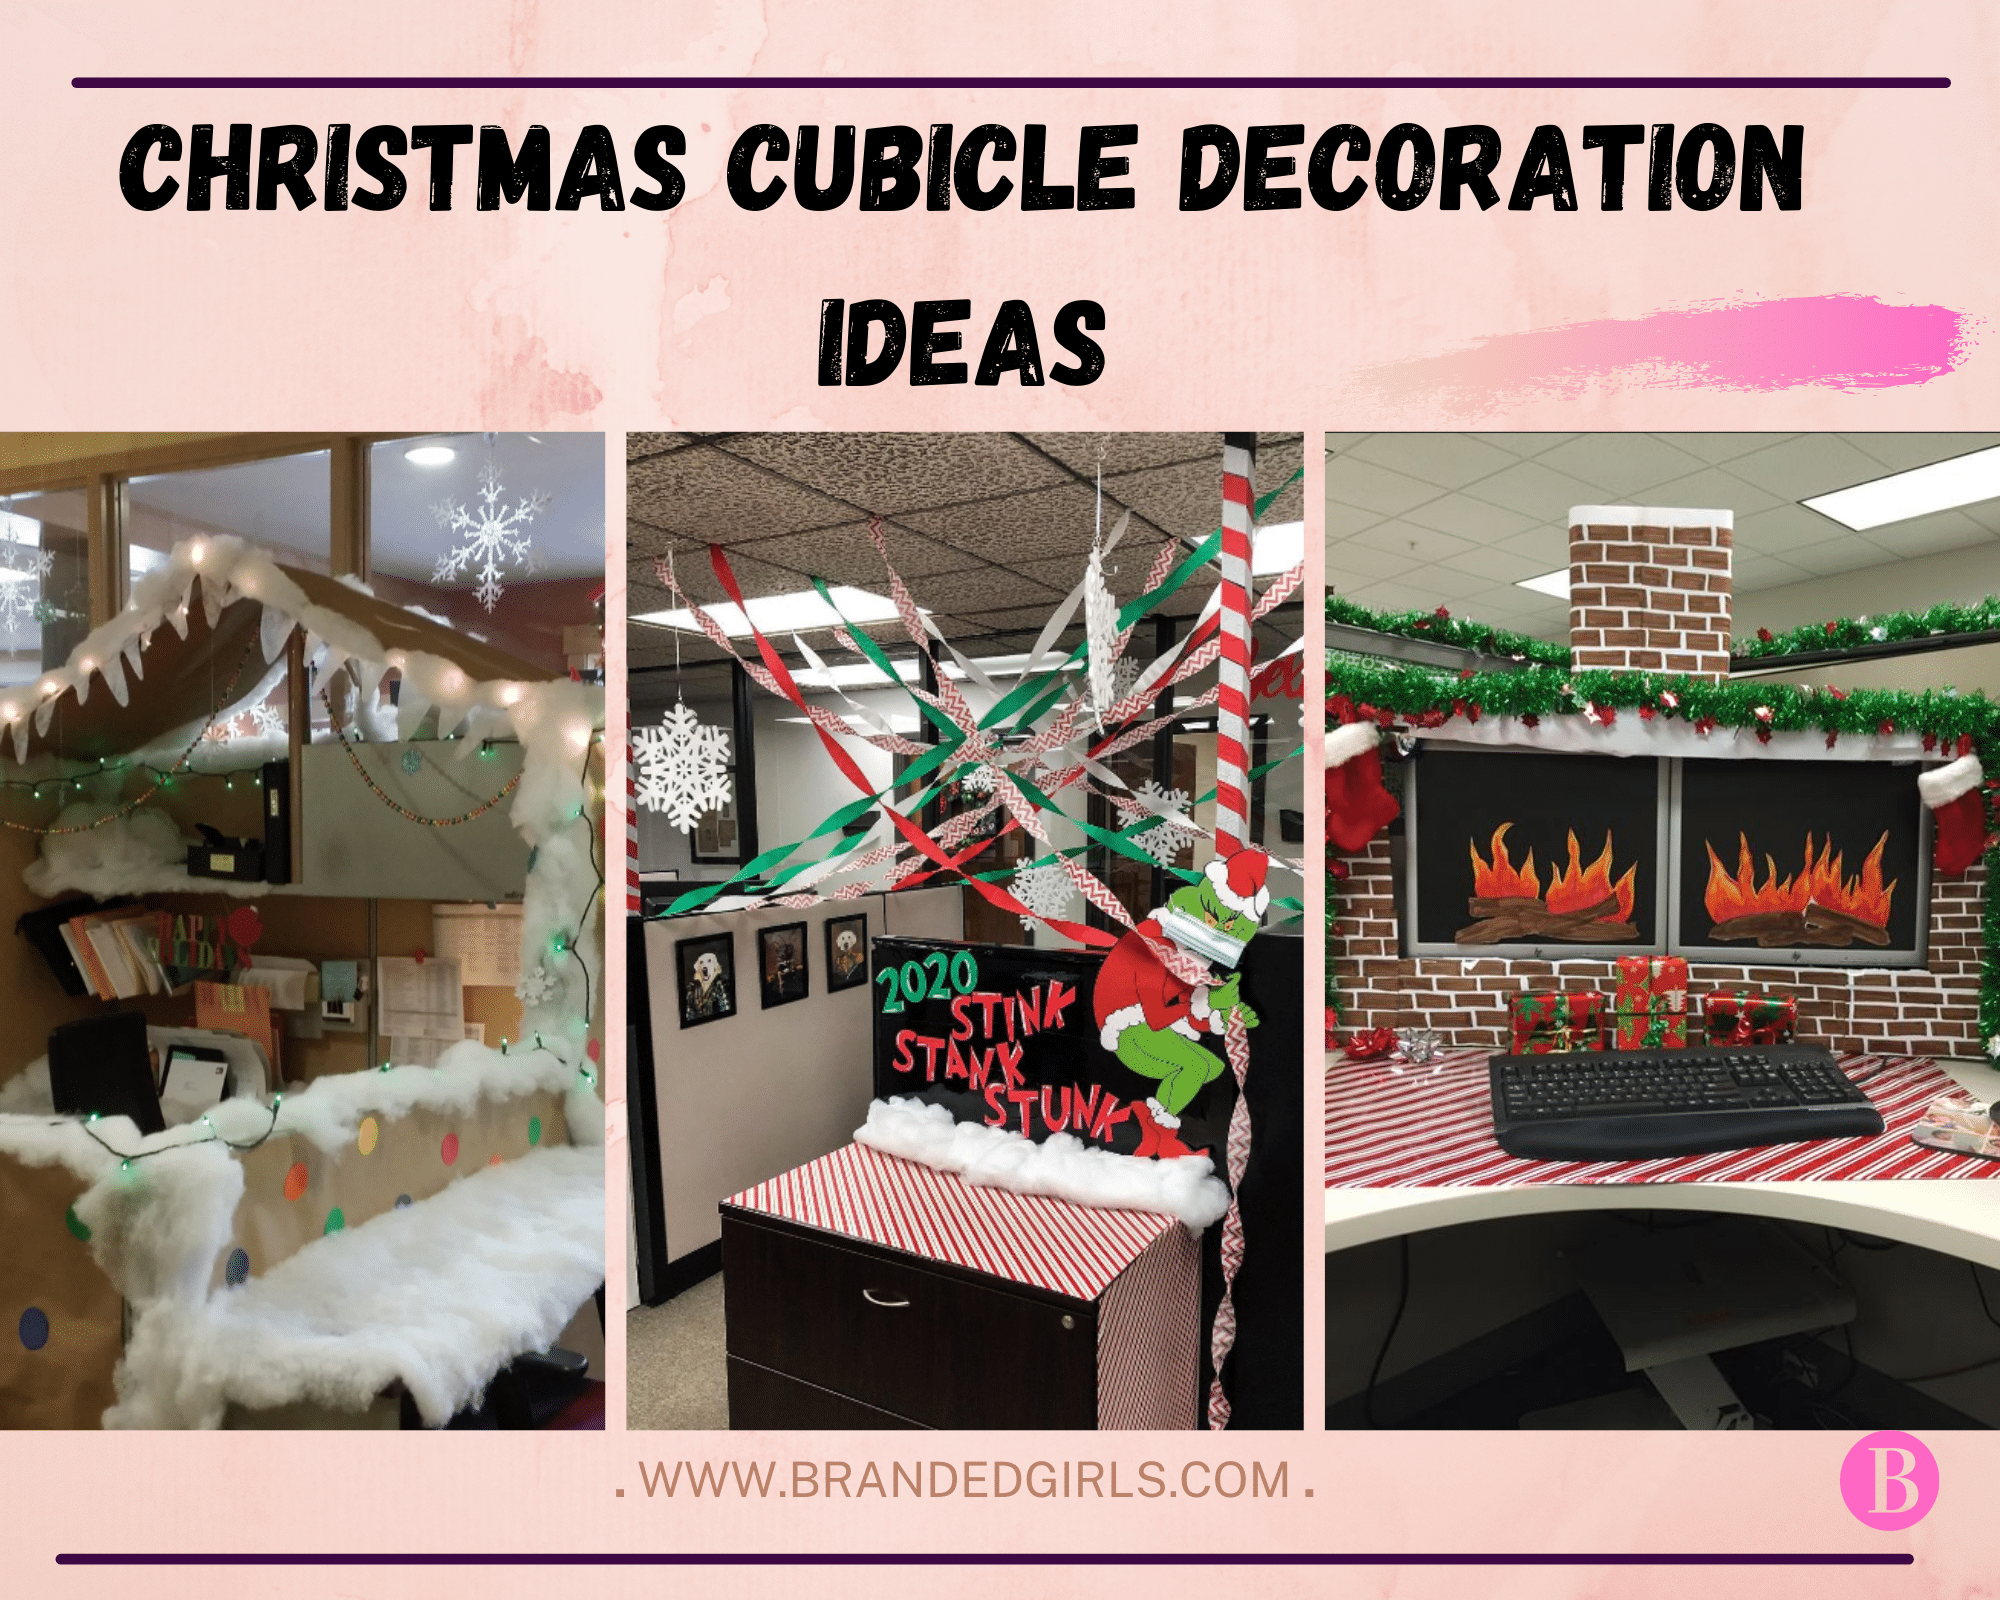 5 magnificent outdoor christmas roof décor ideas  PPT